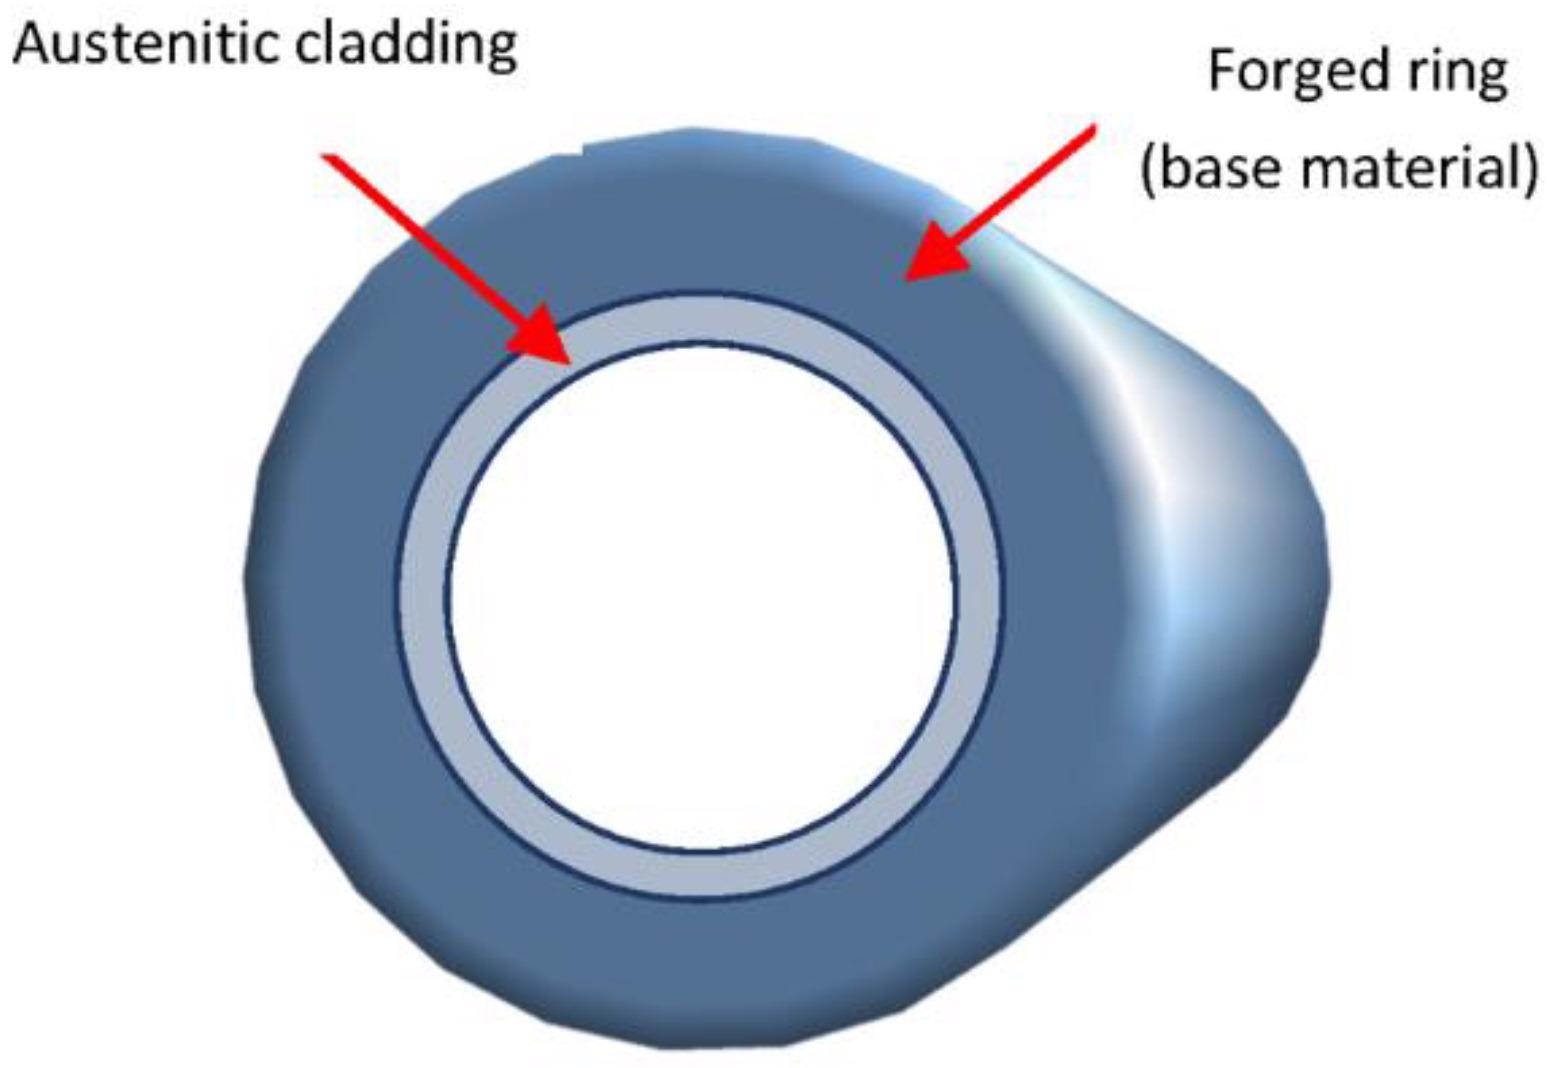 Cutting of the cladded block from a forged ring.